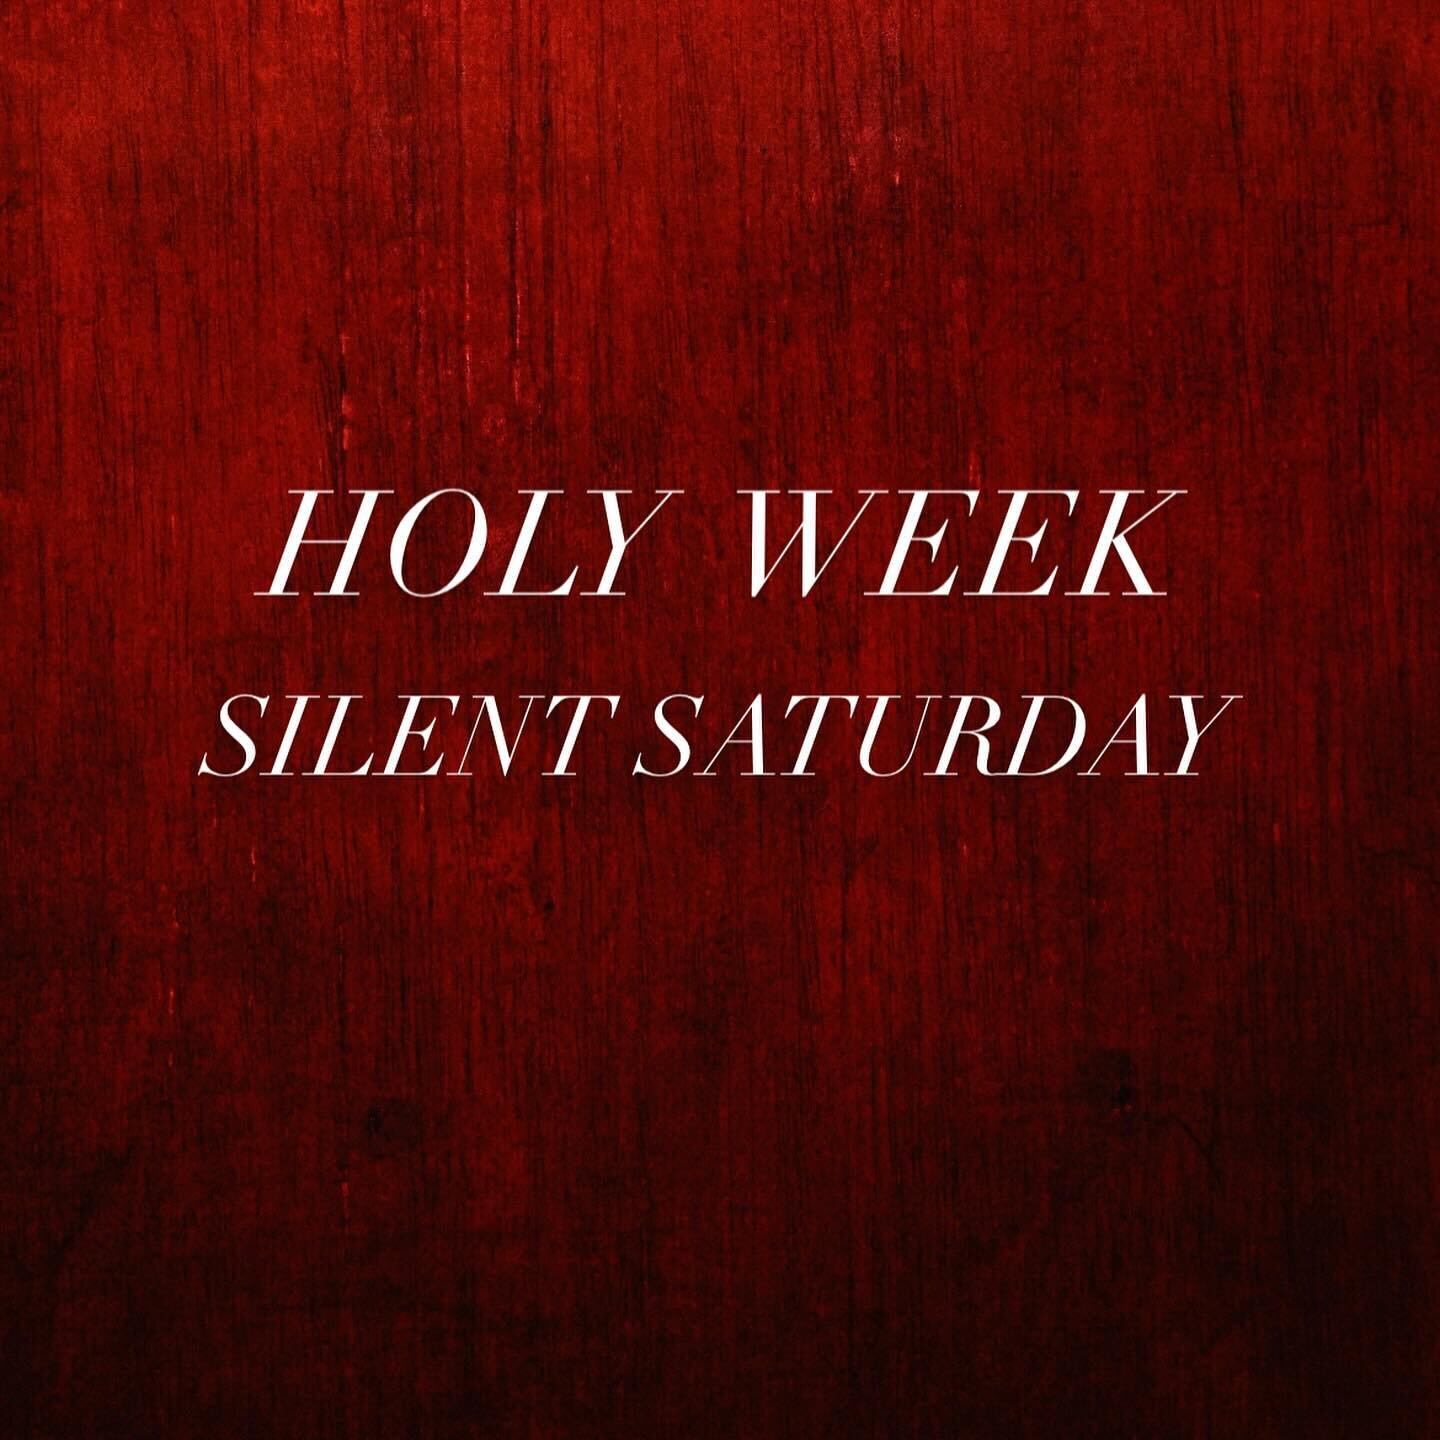 SILENT SATURDAY
__
The horror of Friday was still setting in. For those who placed their hope in Jesus as their new king, their Messiah, it seemed their hope was lost.
But Sunday was coming&hellip;
&mdash;
#missiophx #missiodei #holyweek #silentsatur